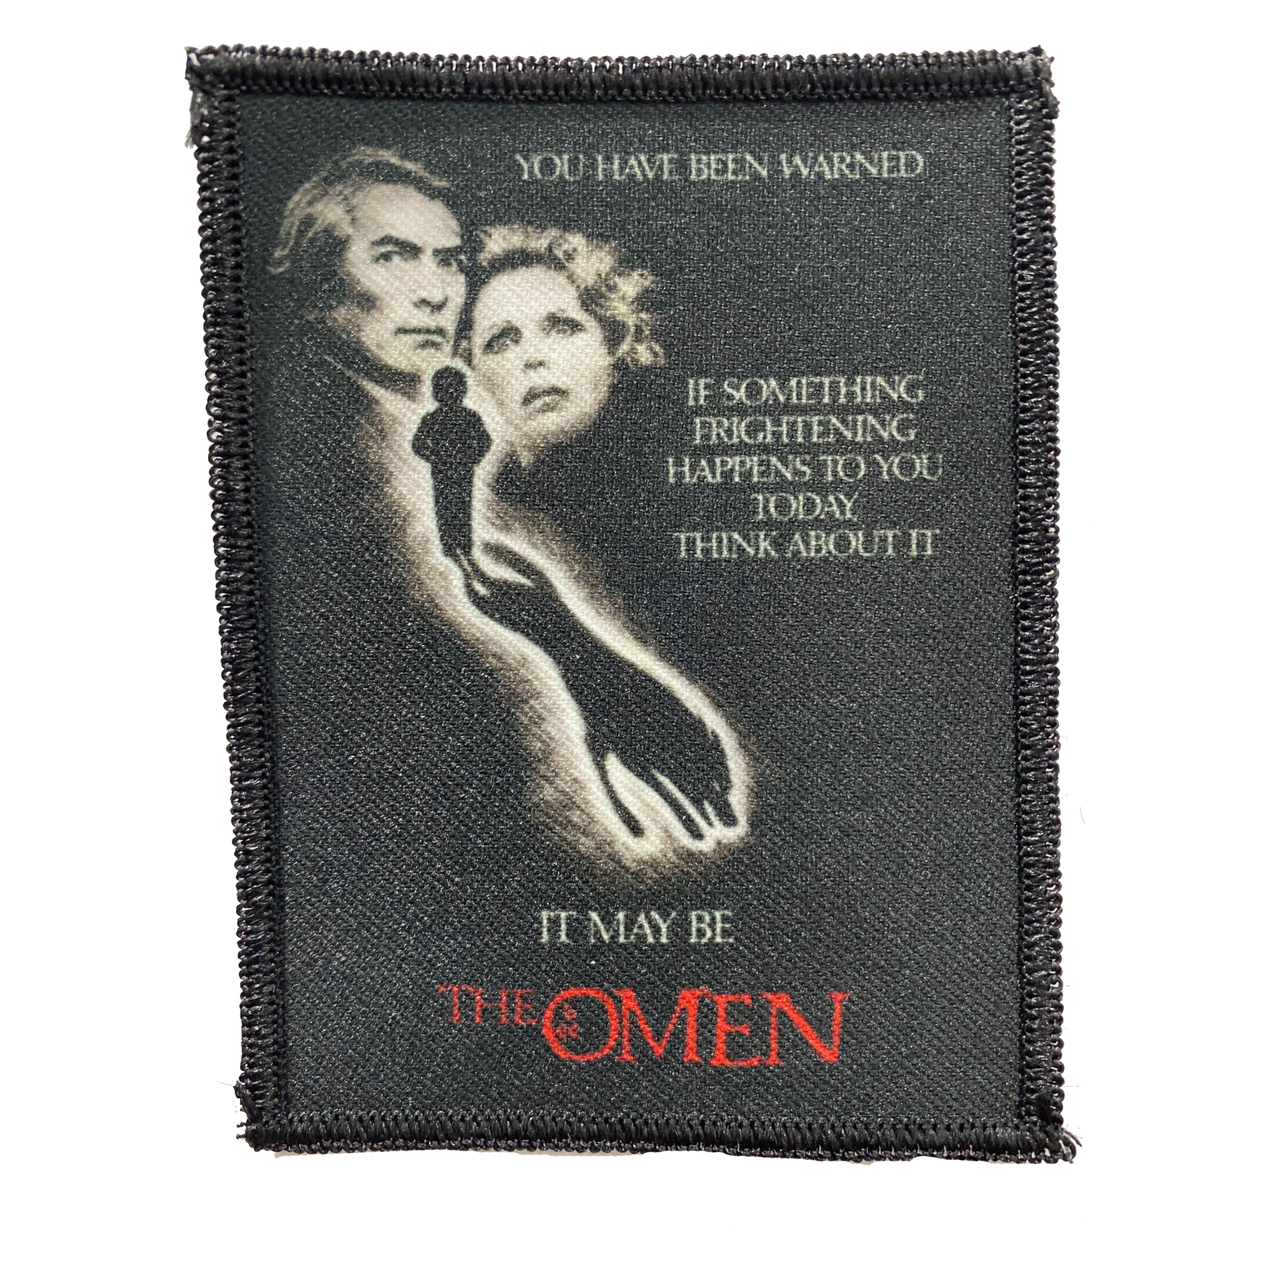 The Omen Patch